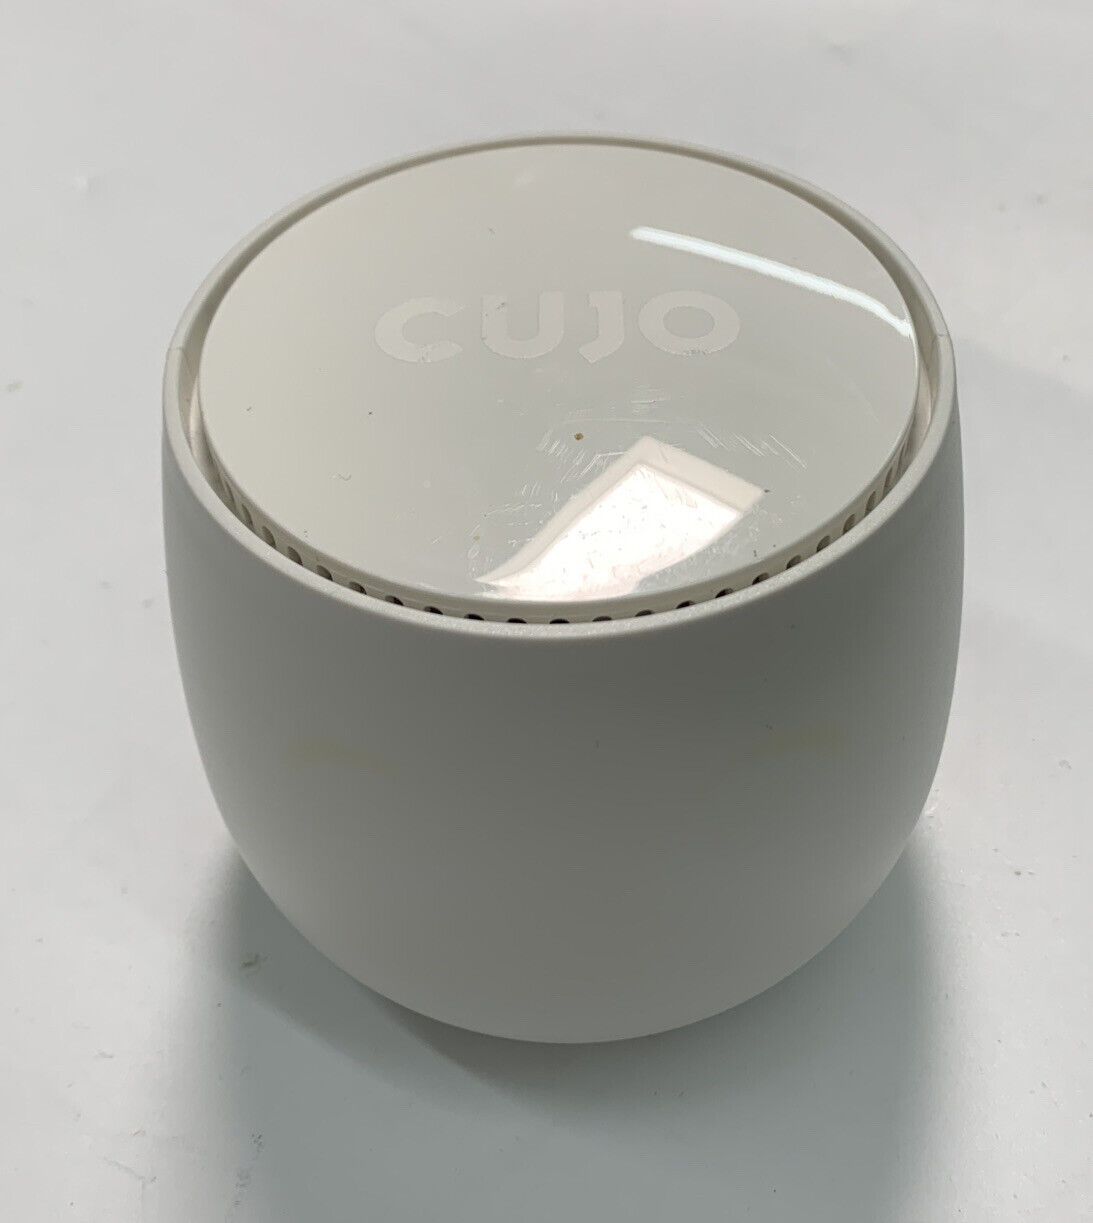 Cujo A0001 Smart Firewall Networking Router - TESTED AND WORKING